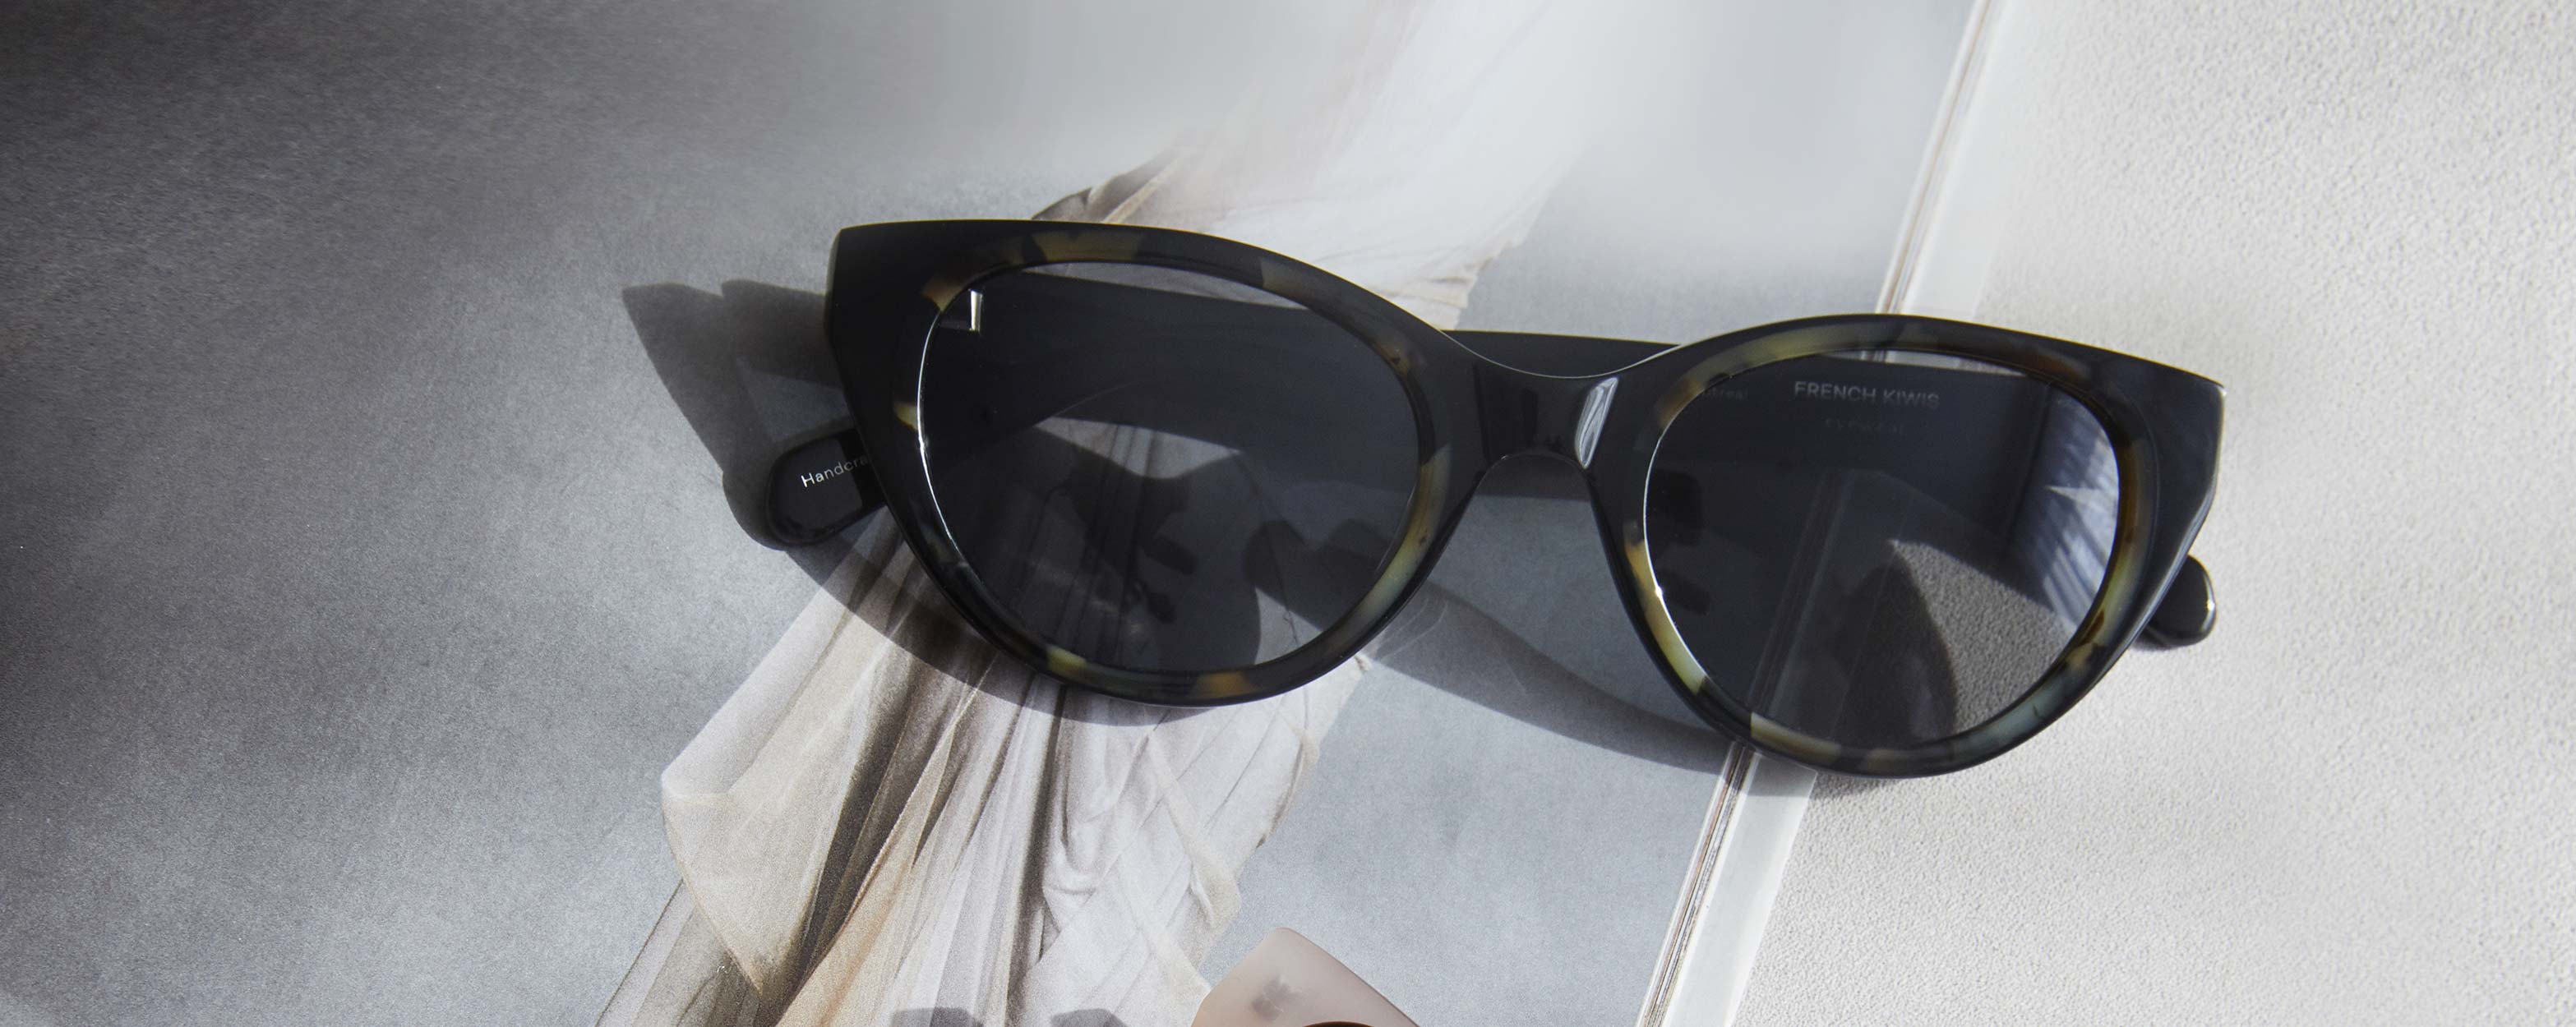 Photo Details of Colette Sun Clear Taupe & Grey Marble Sun Glasses in a room